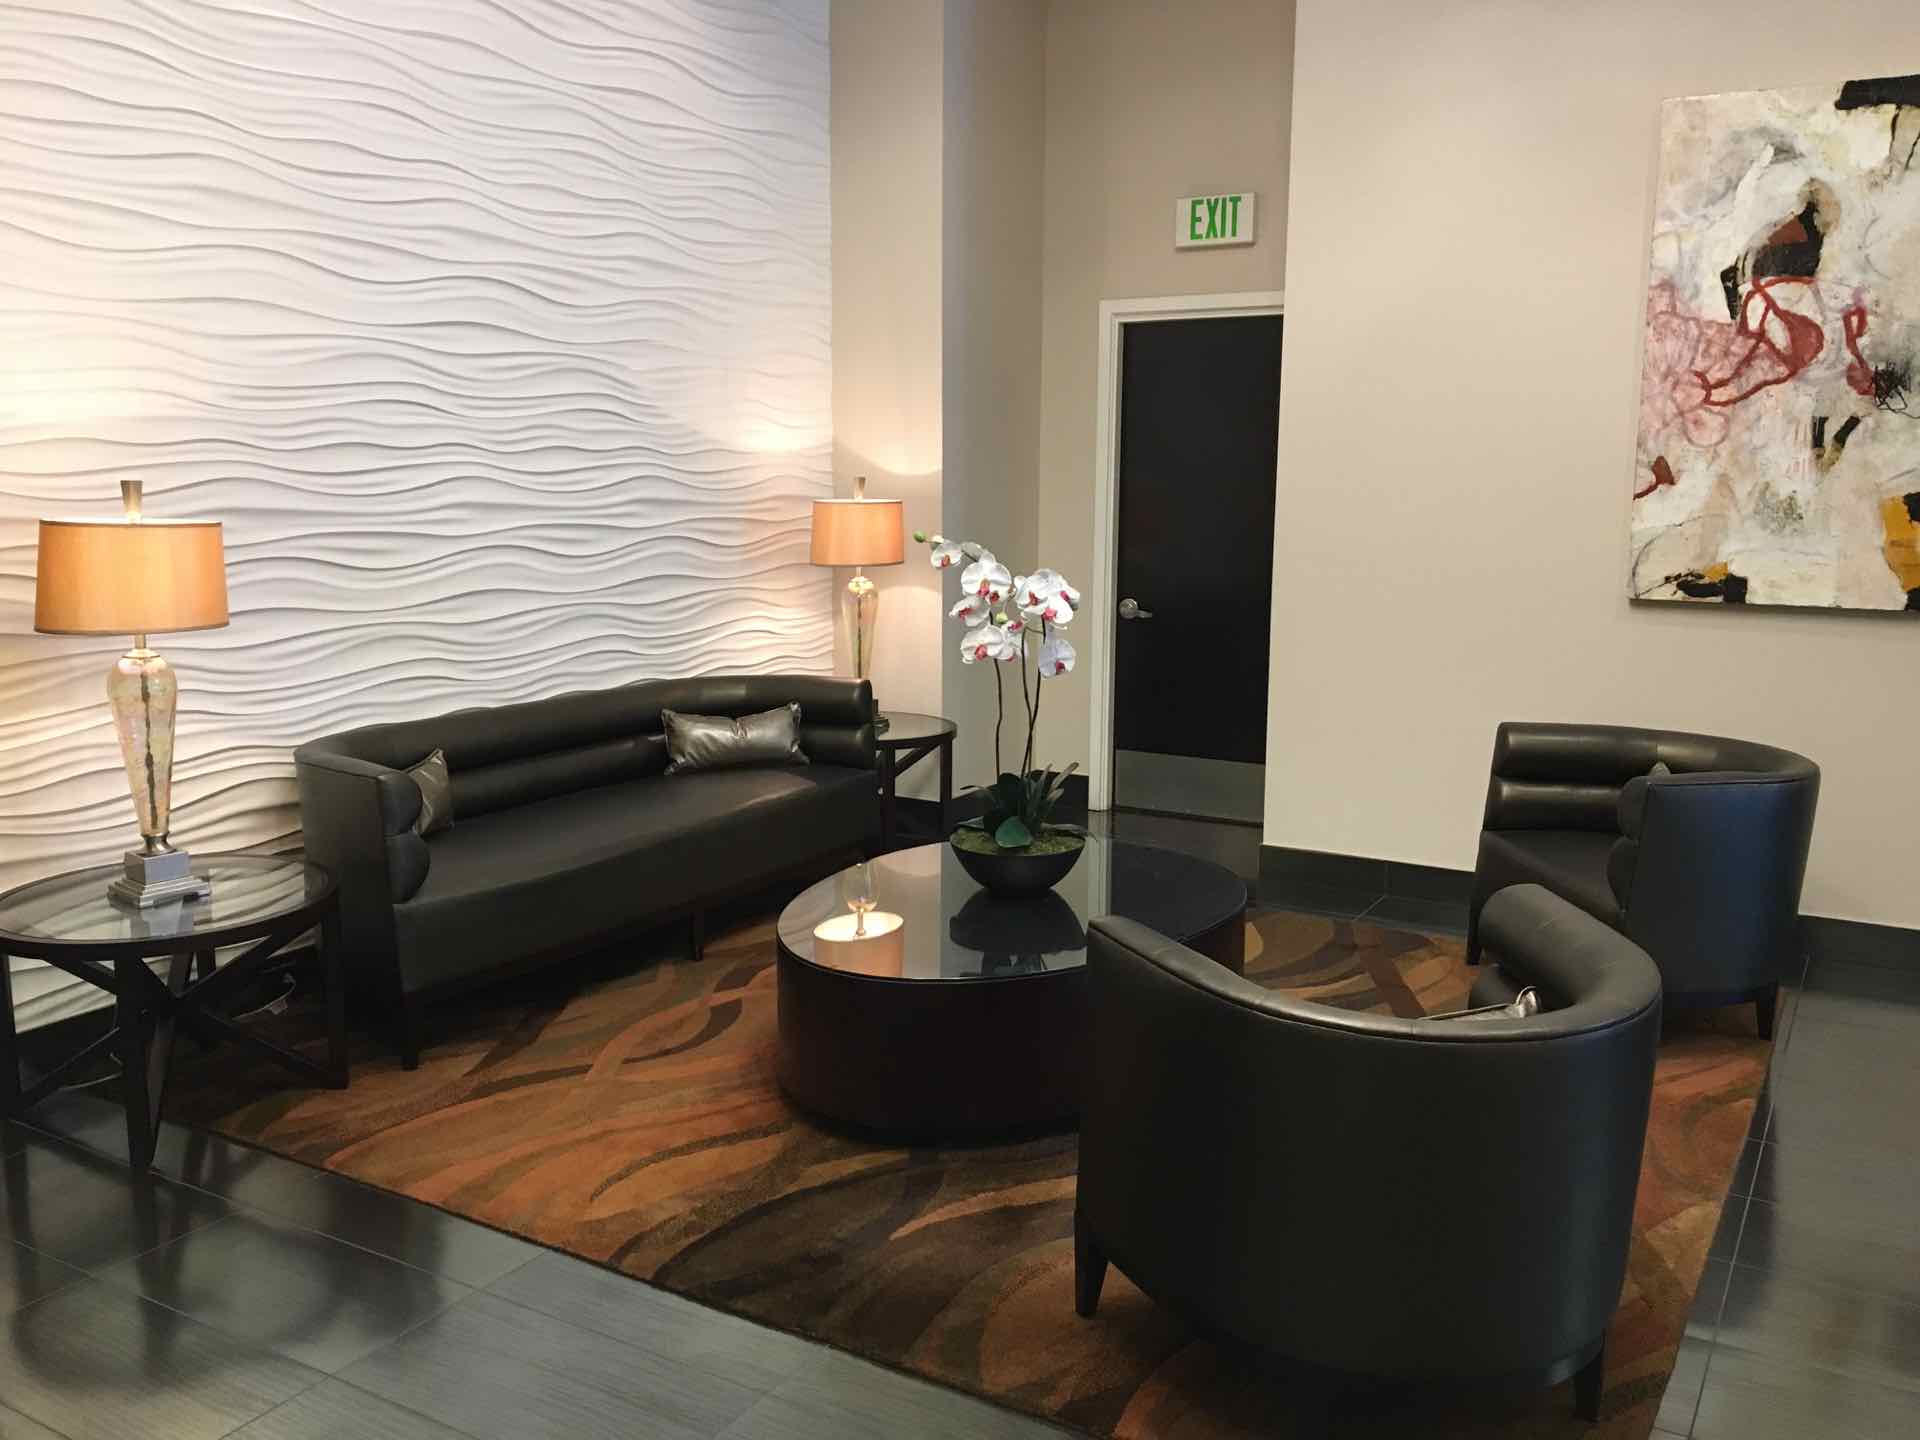 Second seating area located in lobby